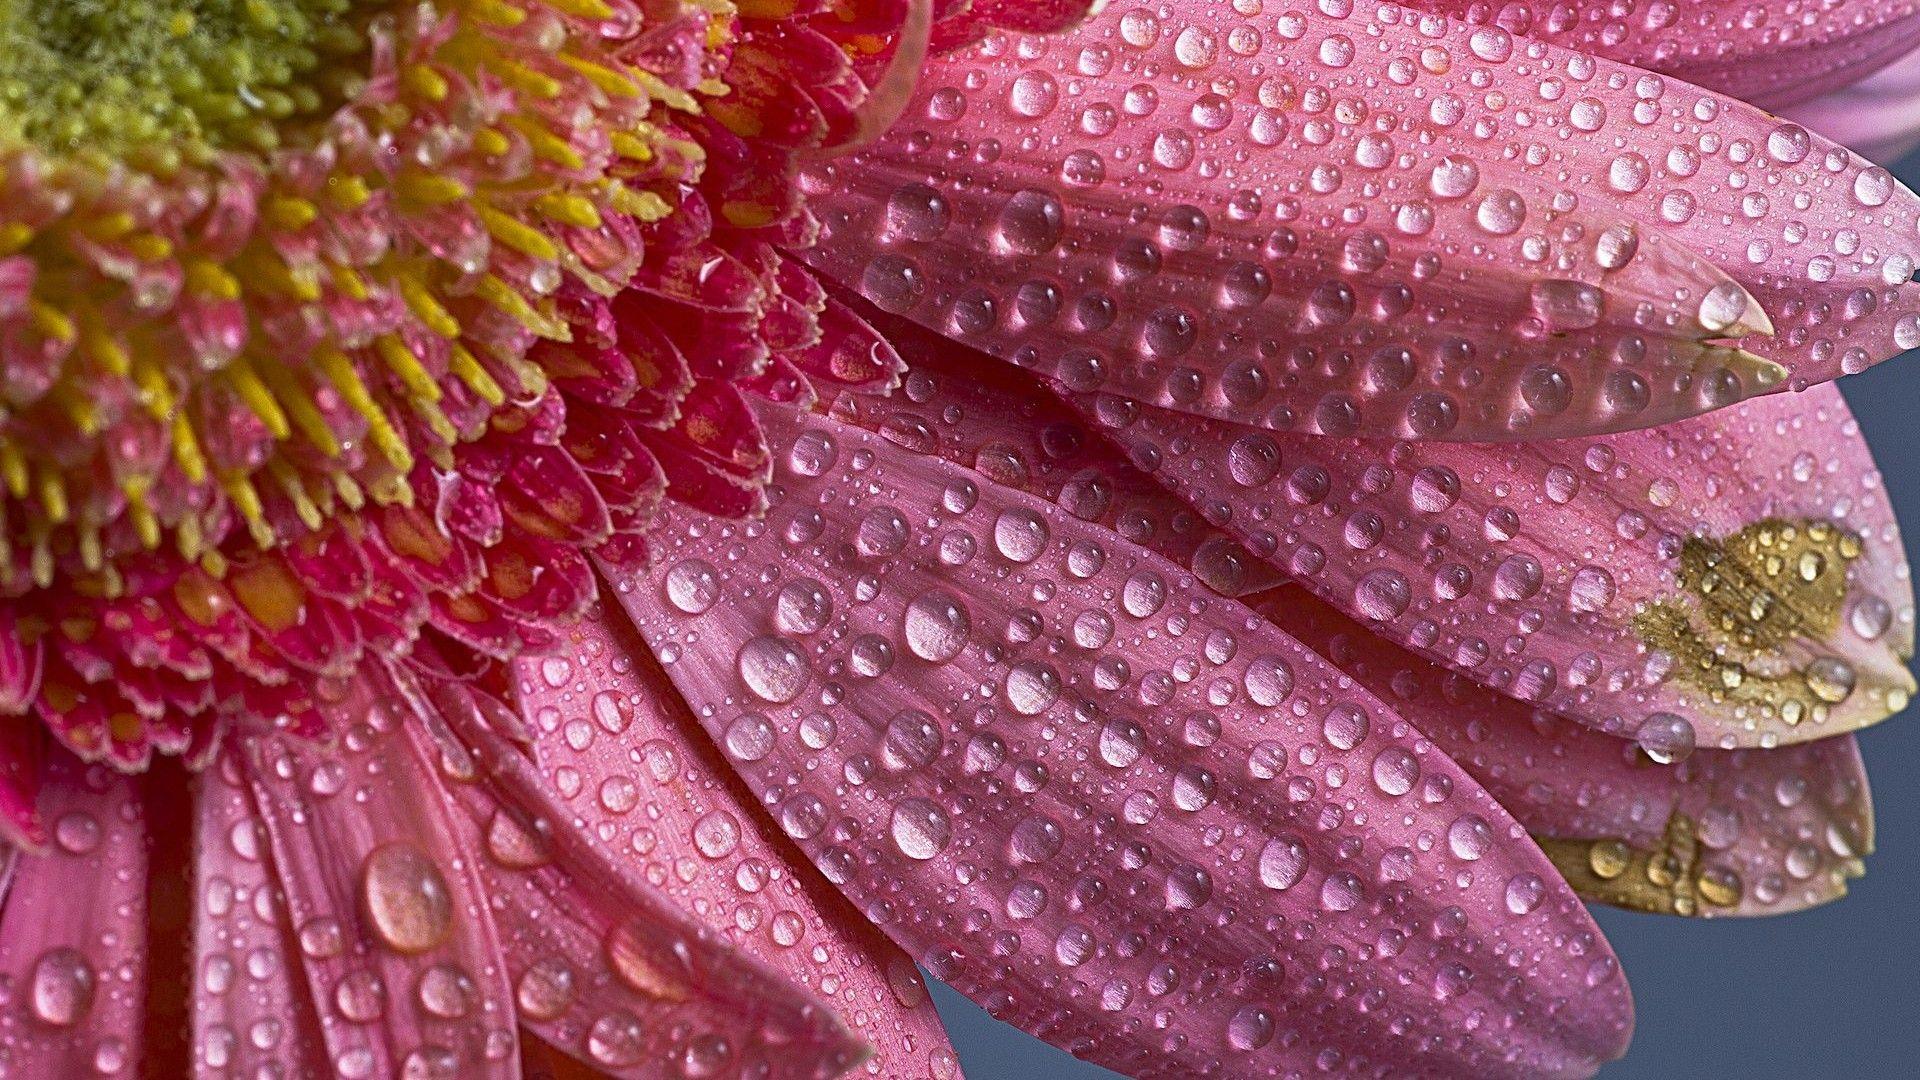 image Of Flowers With Raindrops Many HD Wallpaper